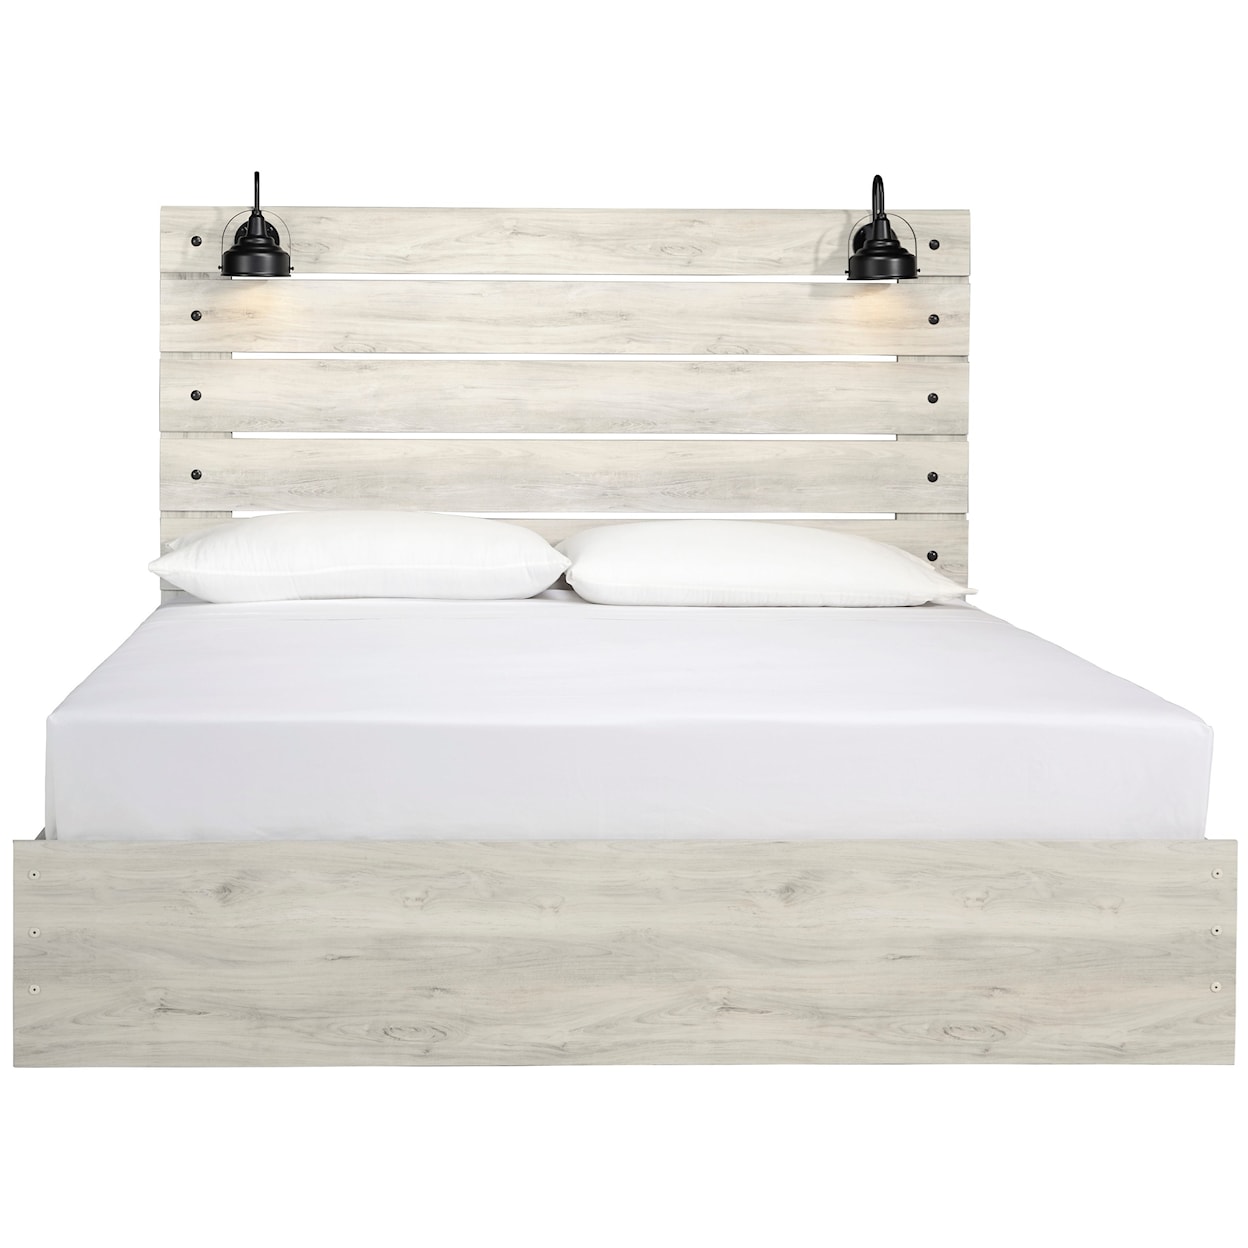 Ashley Furniture Signature Design Cambeck King Panel Bed